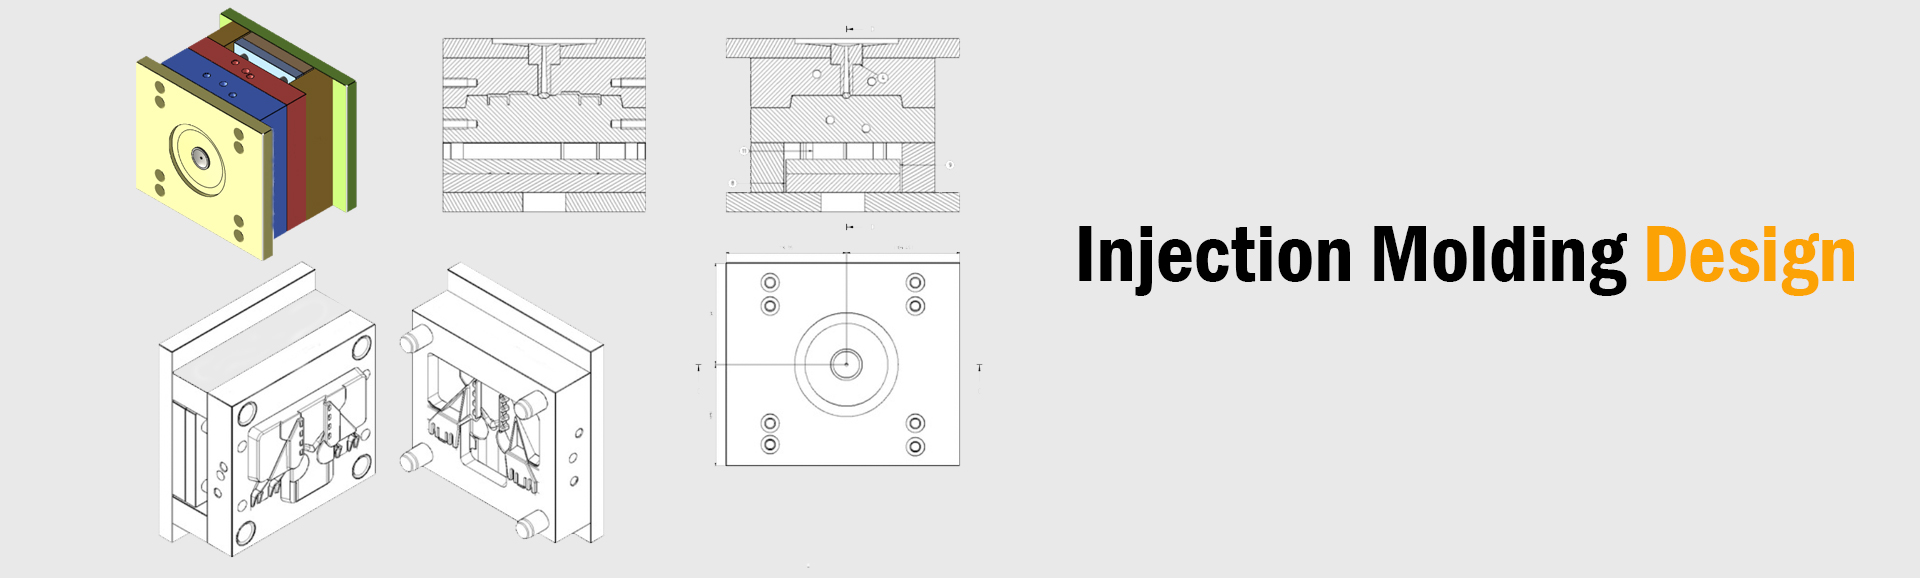 Injection Molding Design